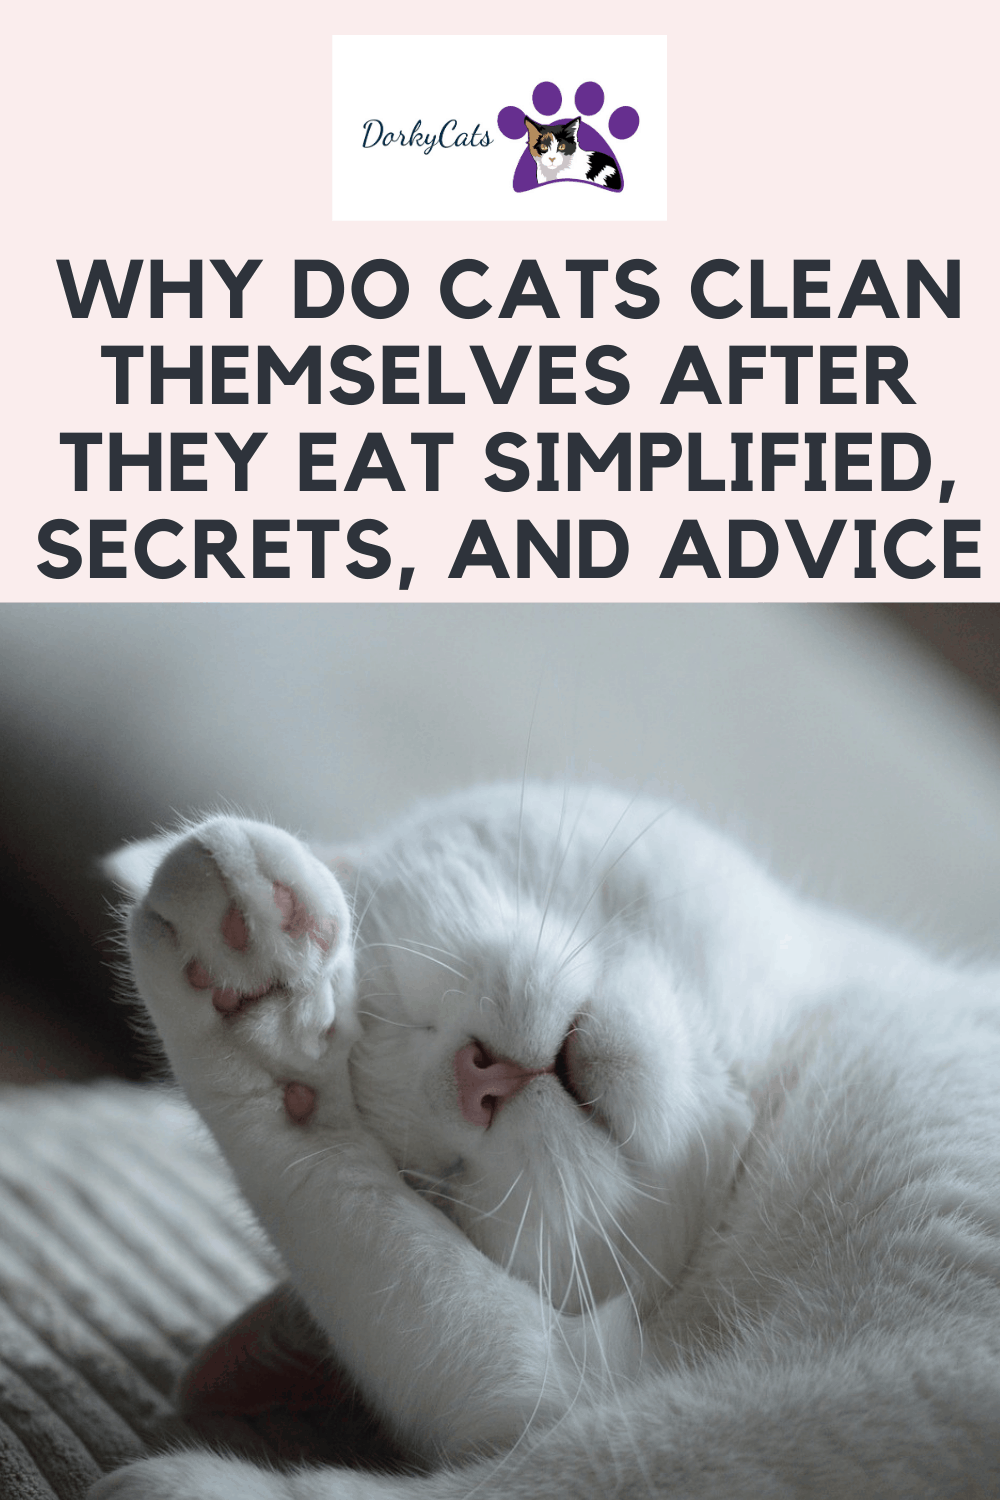 WHY DO CATS CLEAN THEMSELVES AFTER THEY EAT? 4 SURPRISING REASONS